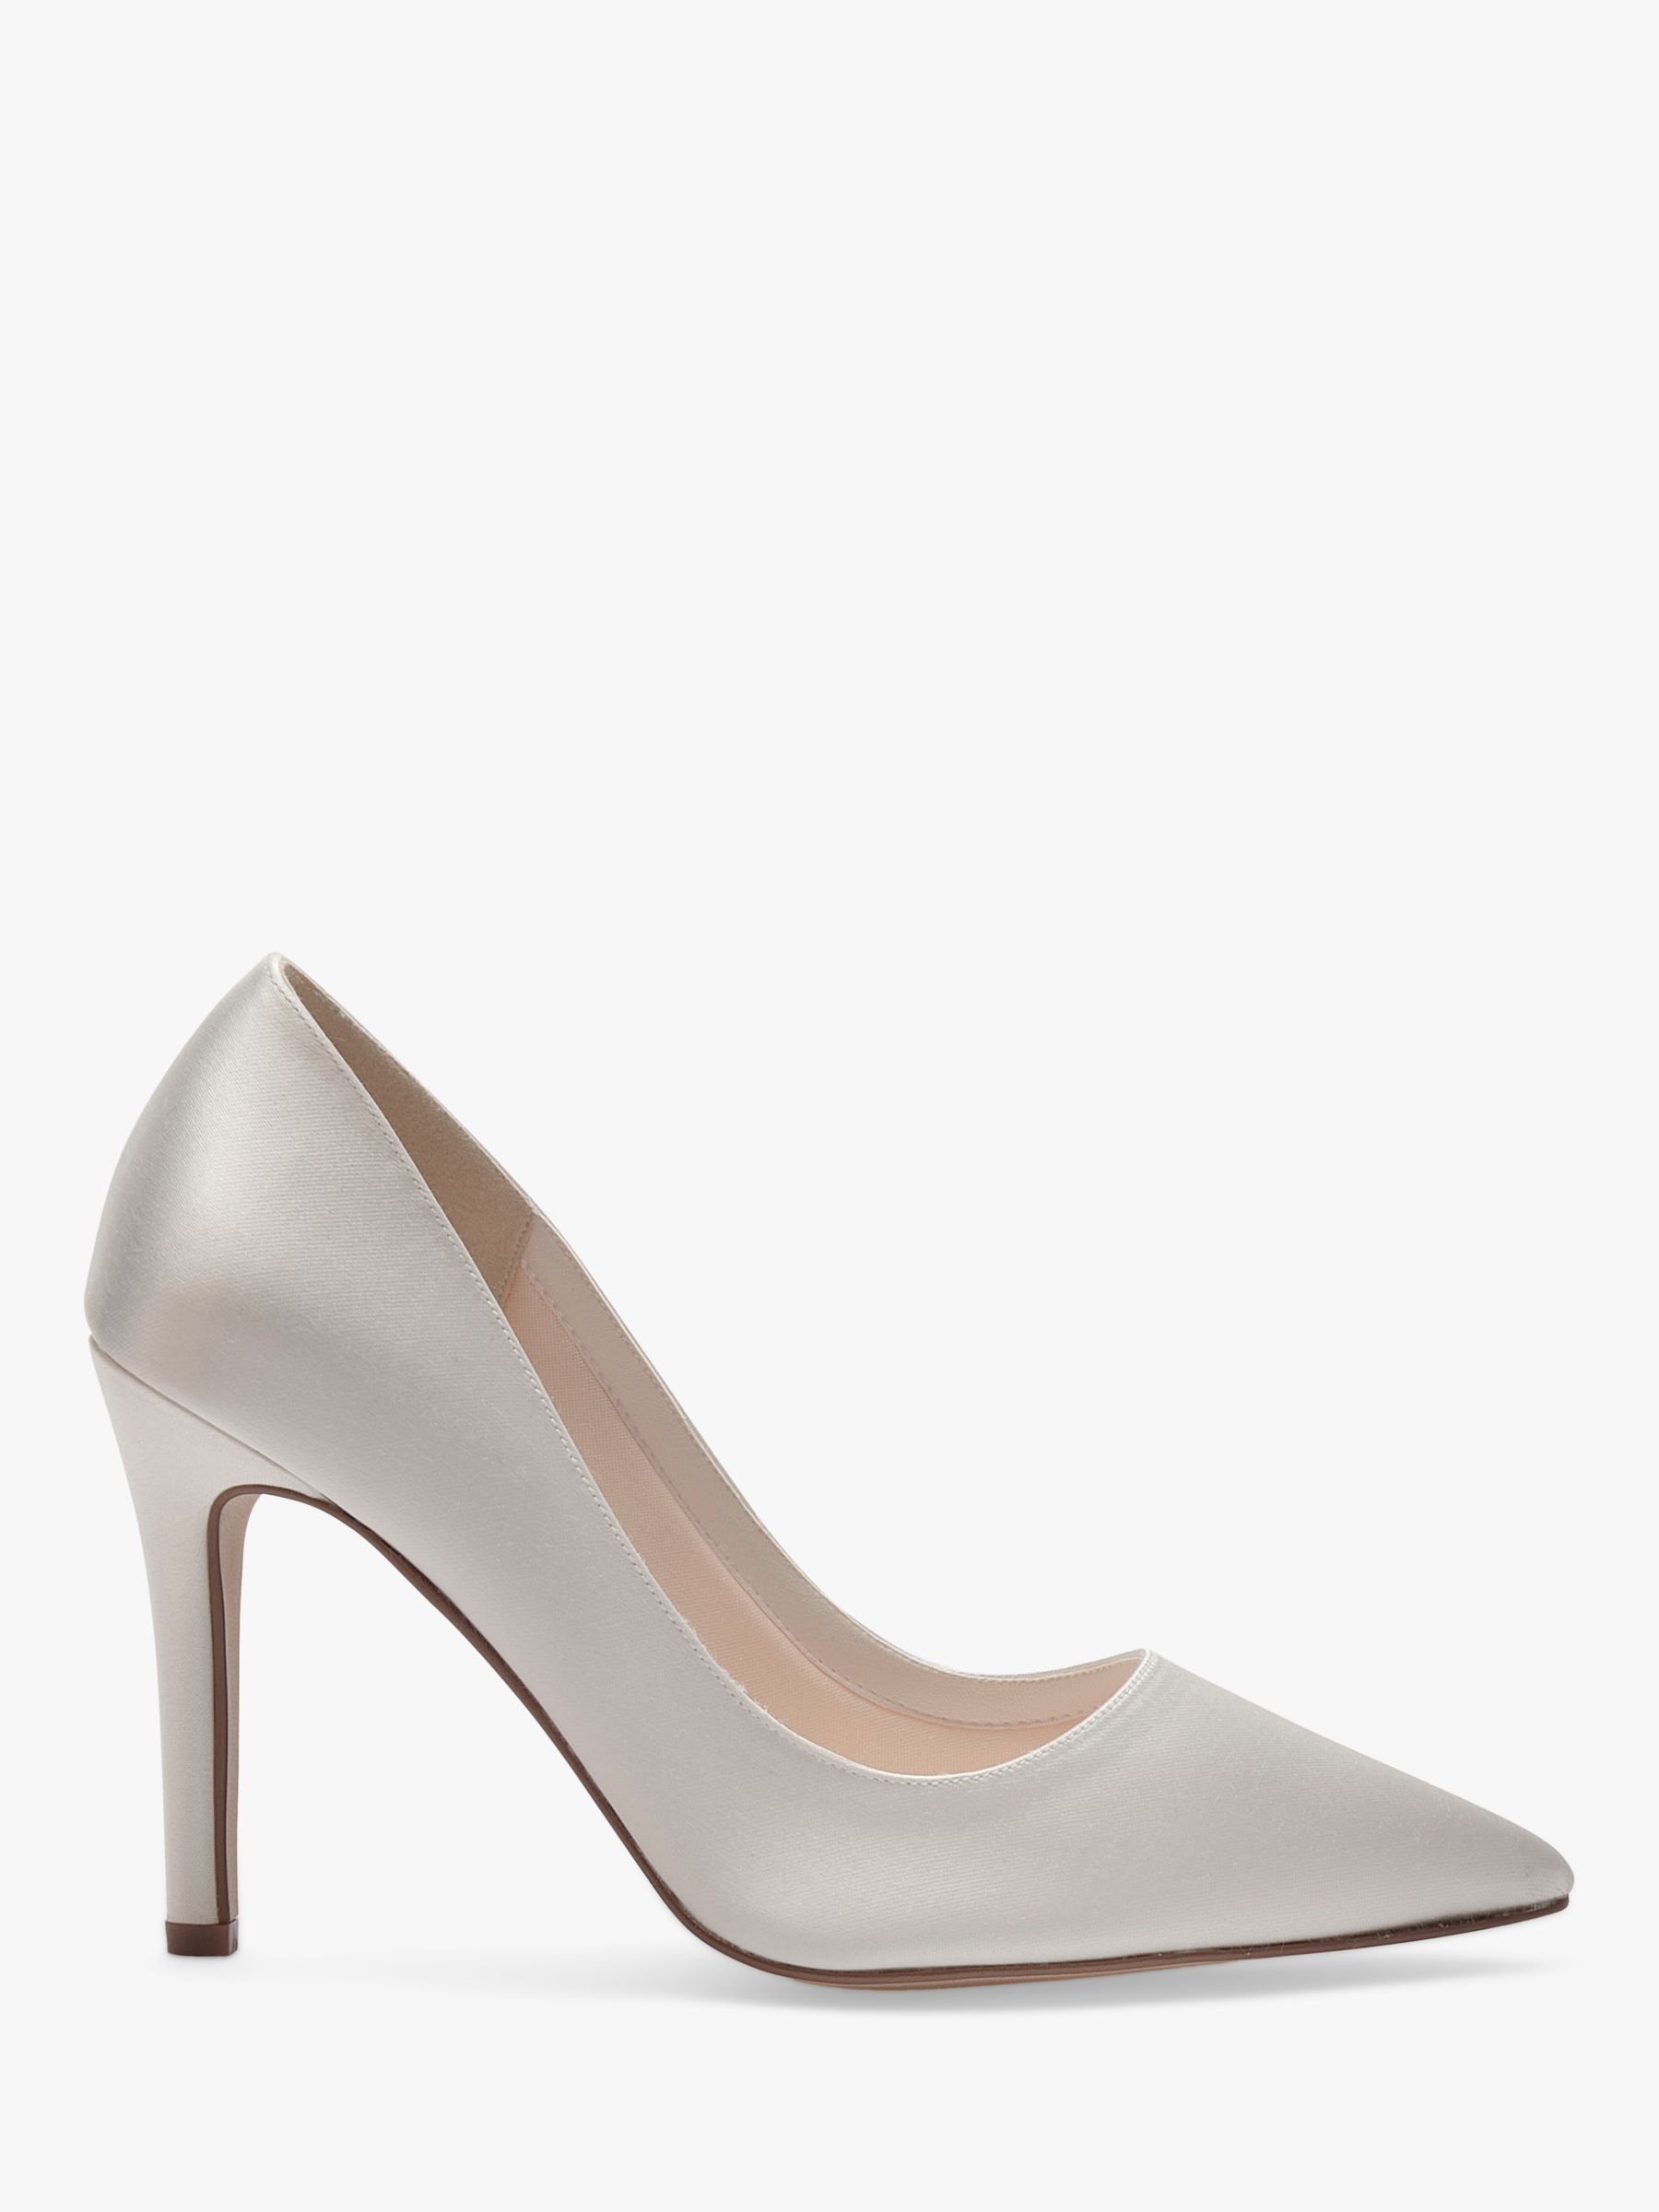 Rainbow Club Coco Pointed Court Shoes, Ivory Satin at John Lewis & Partners